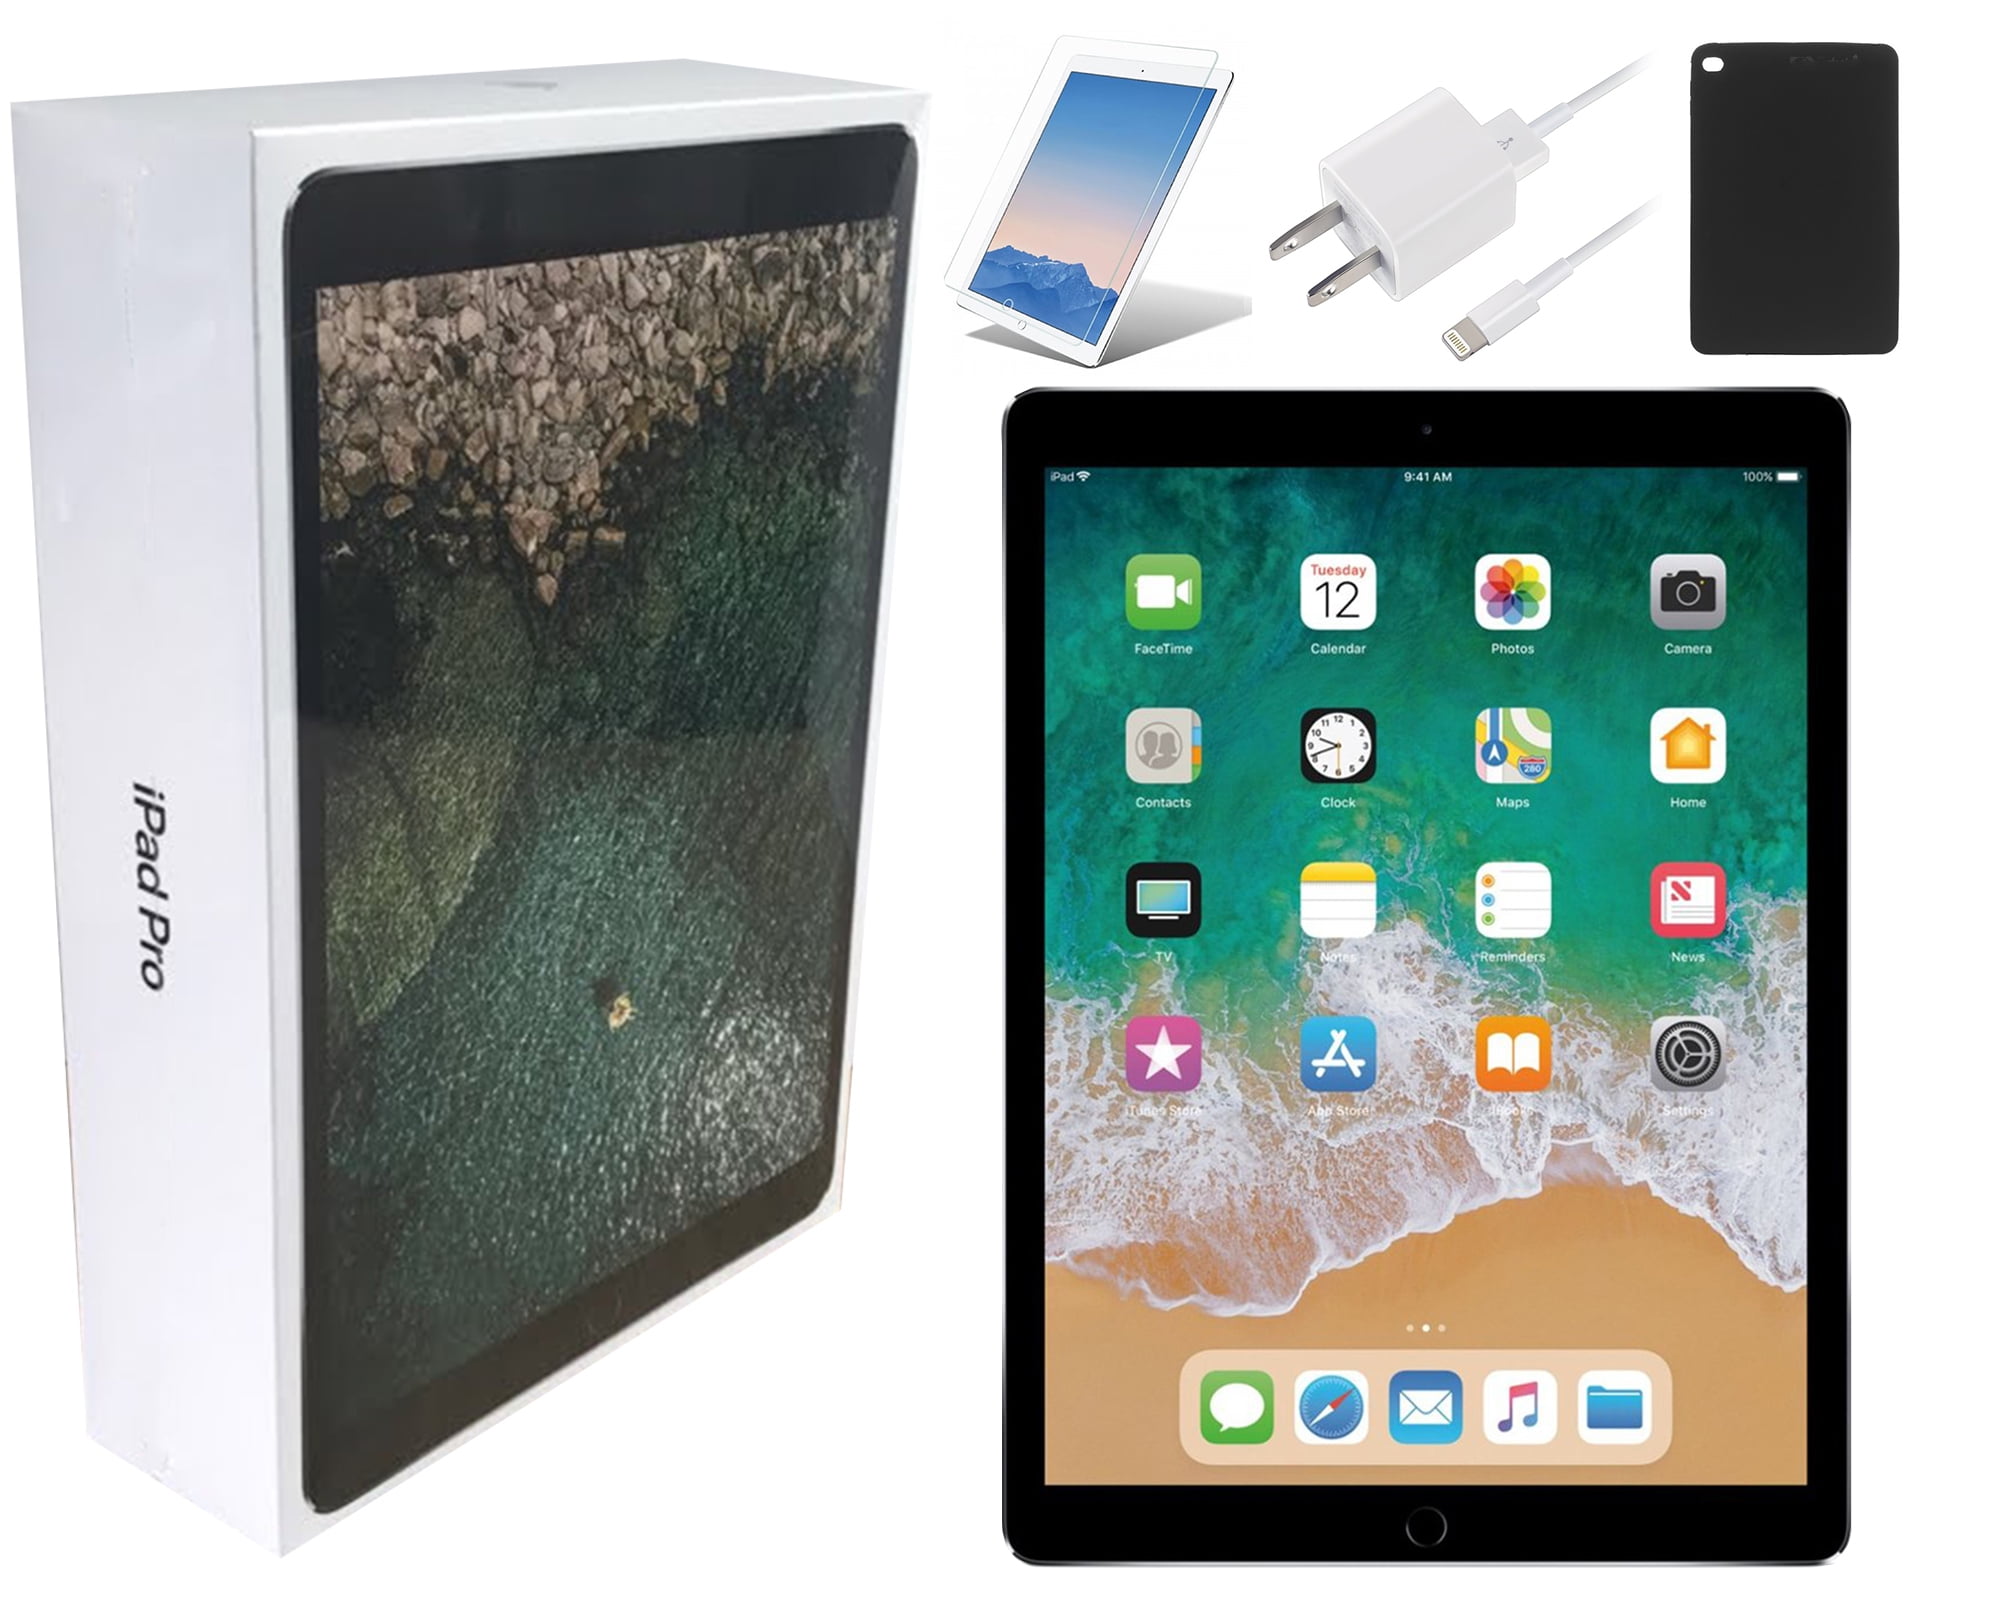 Refurbished Apple iPad Pro 10.5-inch, 64GB, Wi-Fi Only, Space Gray, Bundle  Includes: Case, Tempered Glass, Charger, and Get Free Shipping!